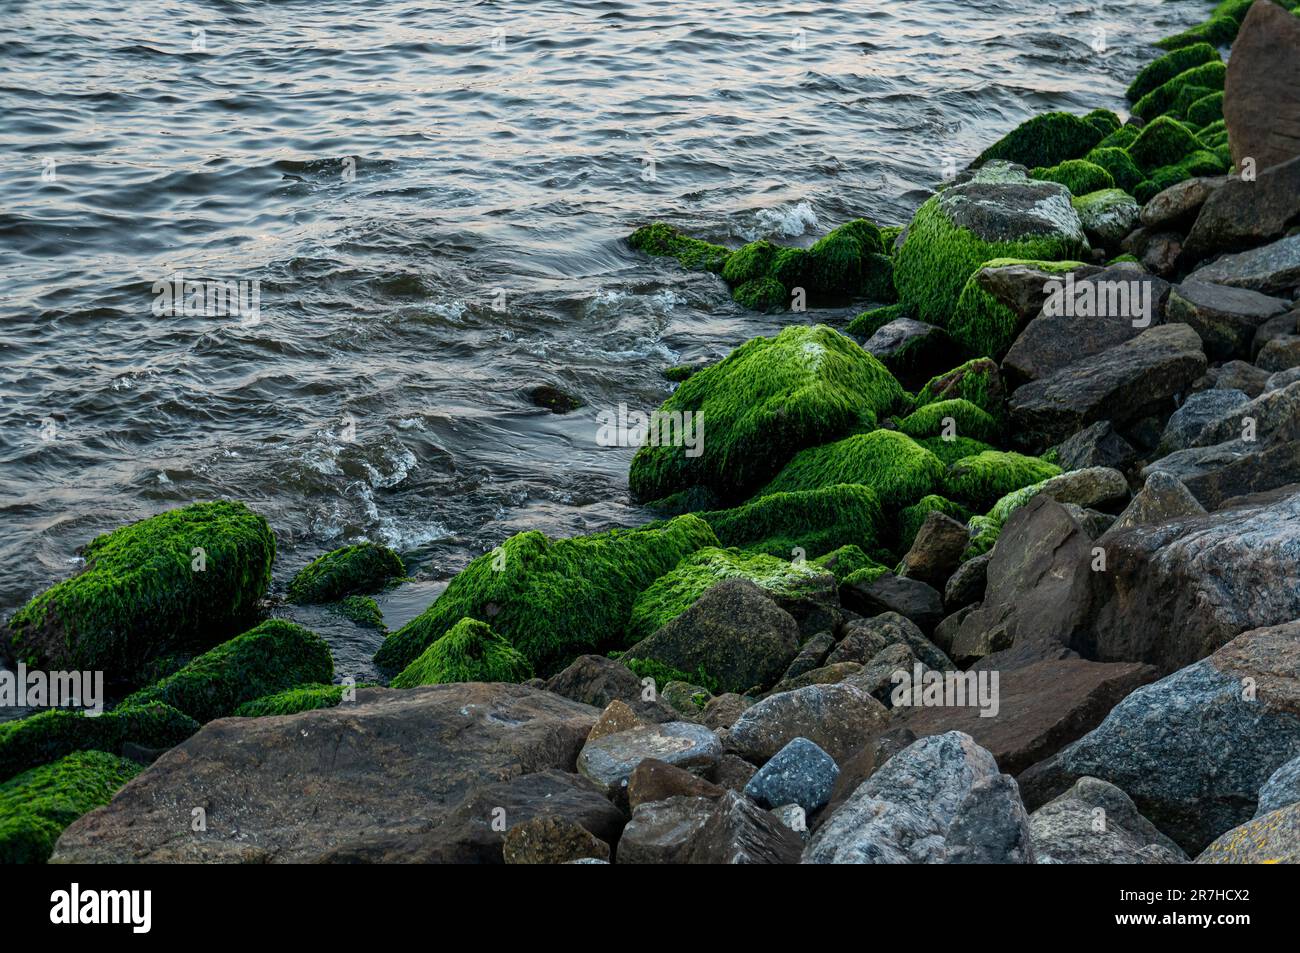 Rock Pier (Pier de Pedra) rocks covered in green moss bathed with Guanabara bay salt waters in in Centro district, nearby Santos Dumont airport. Stock Photo